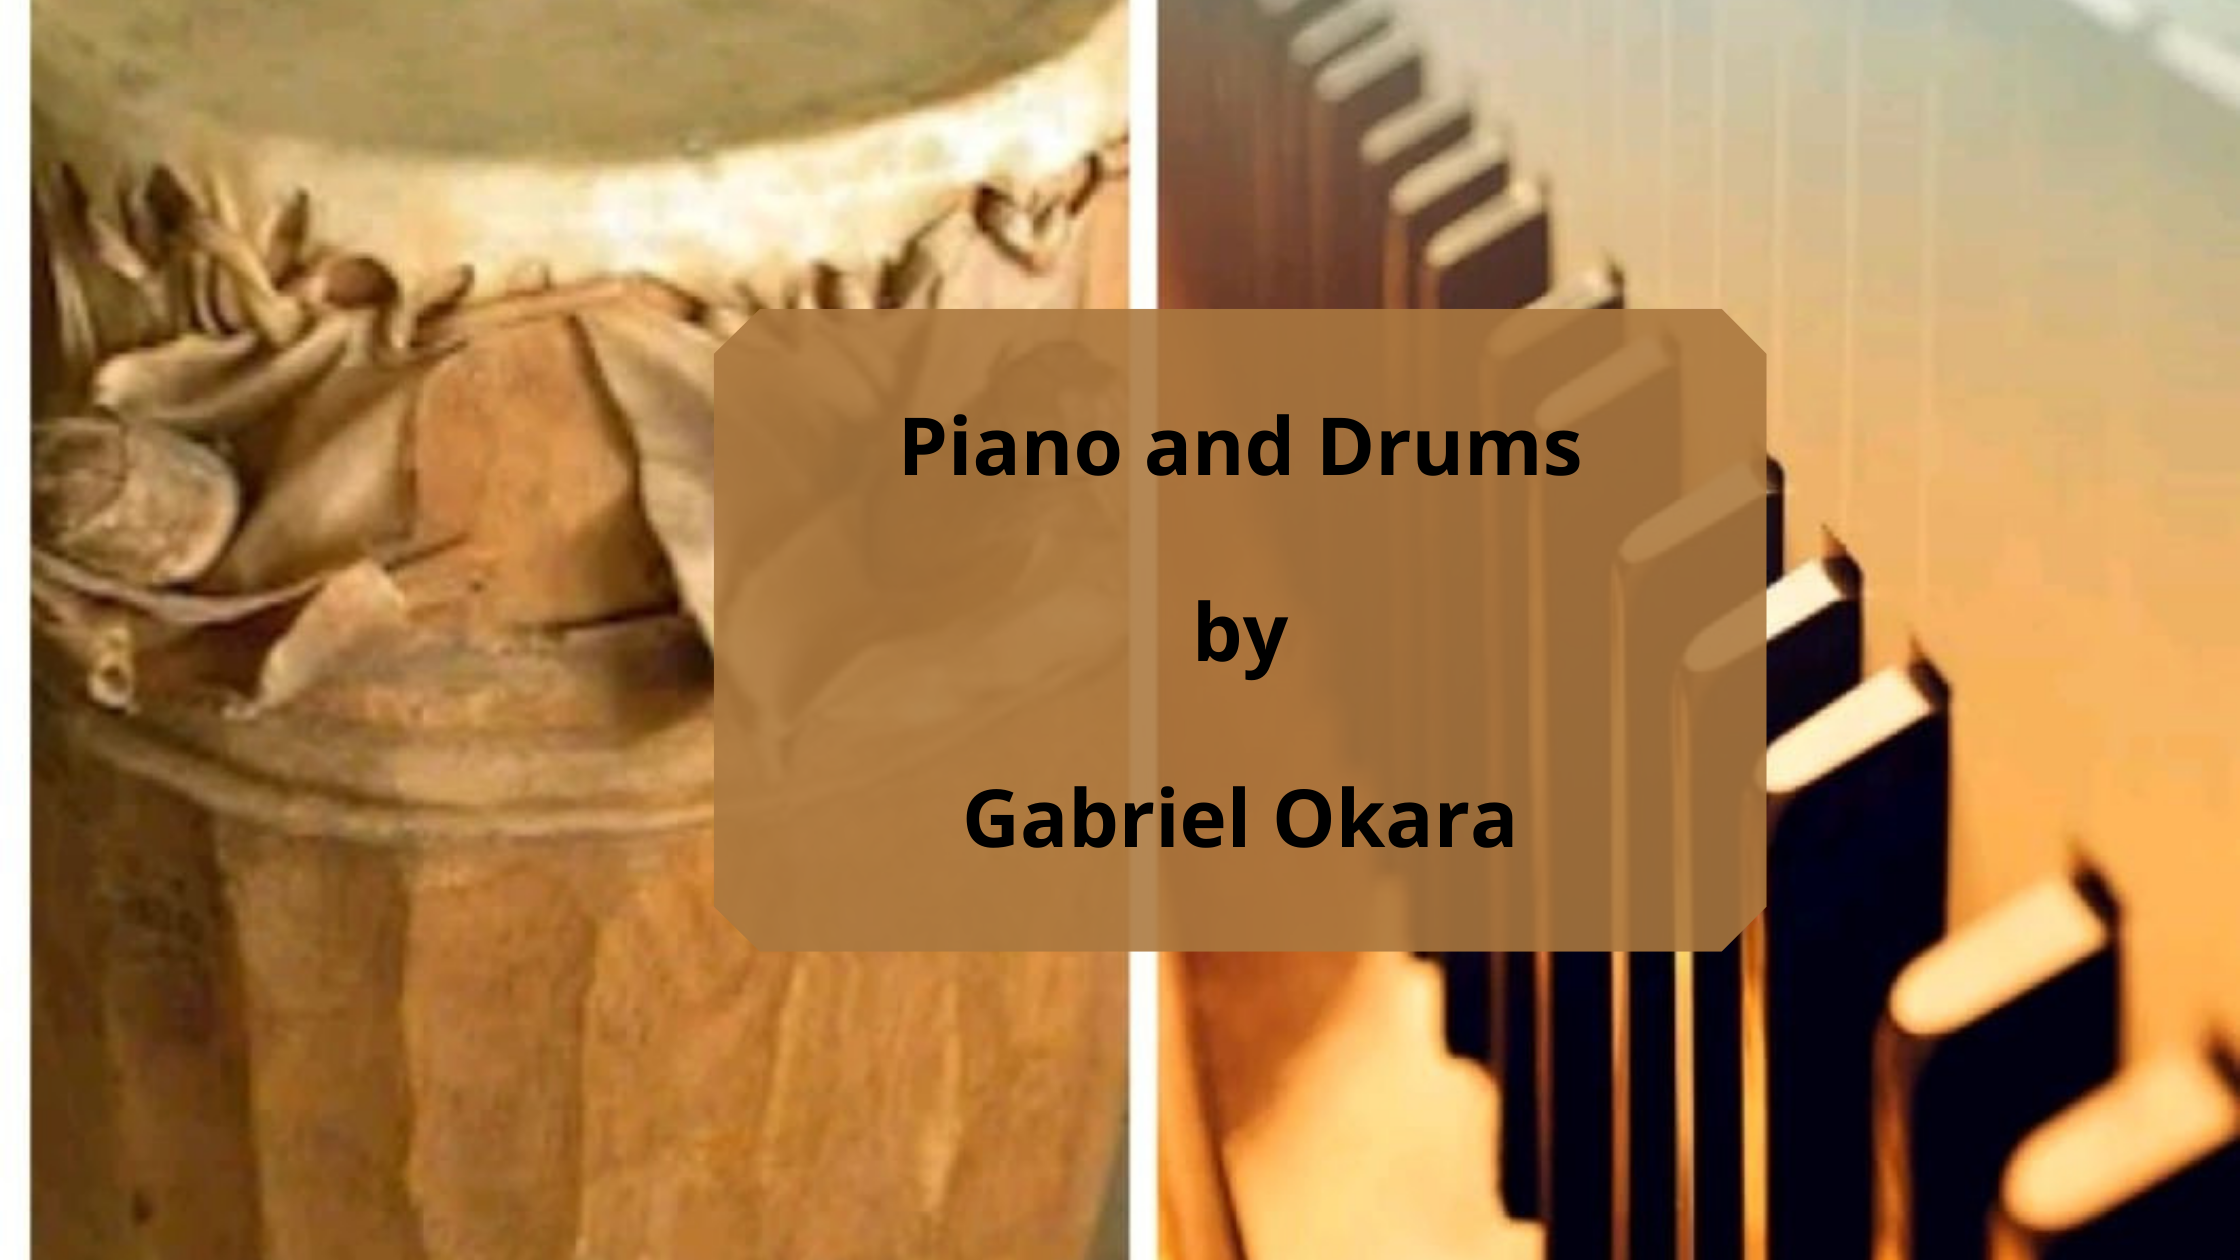 POEM || The Piano and Drums by Gabriel Okara